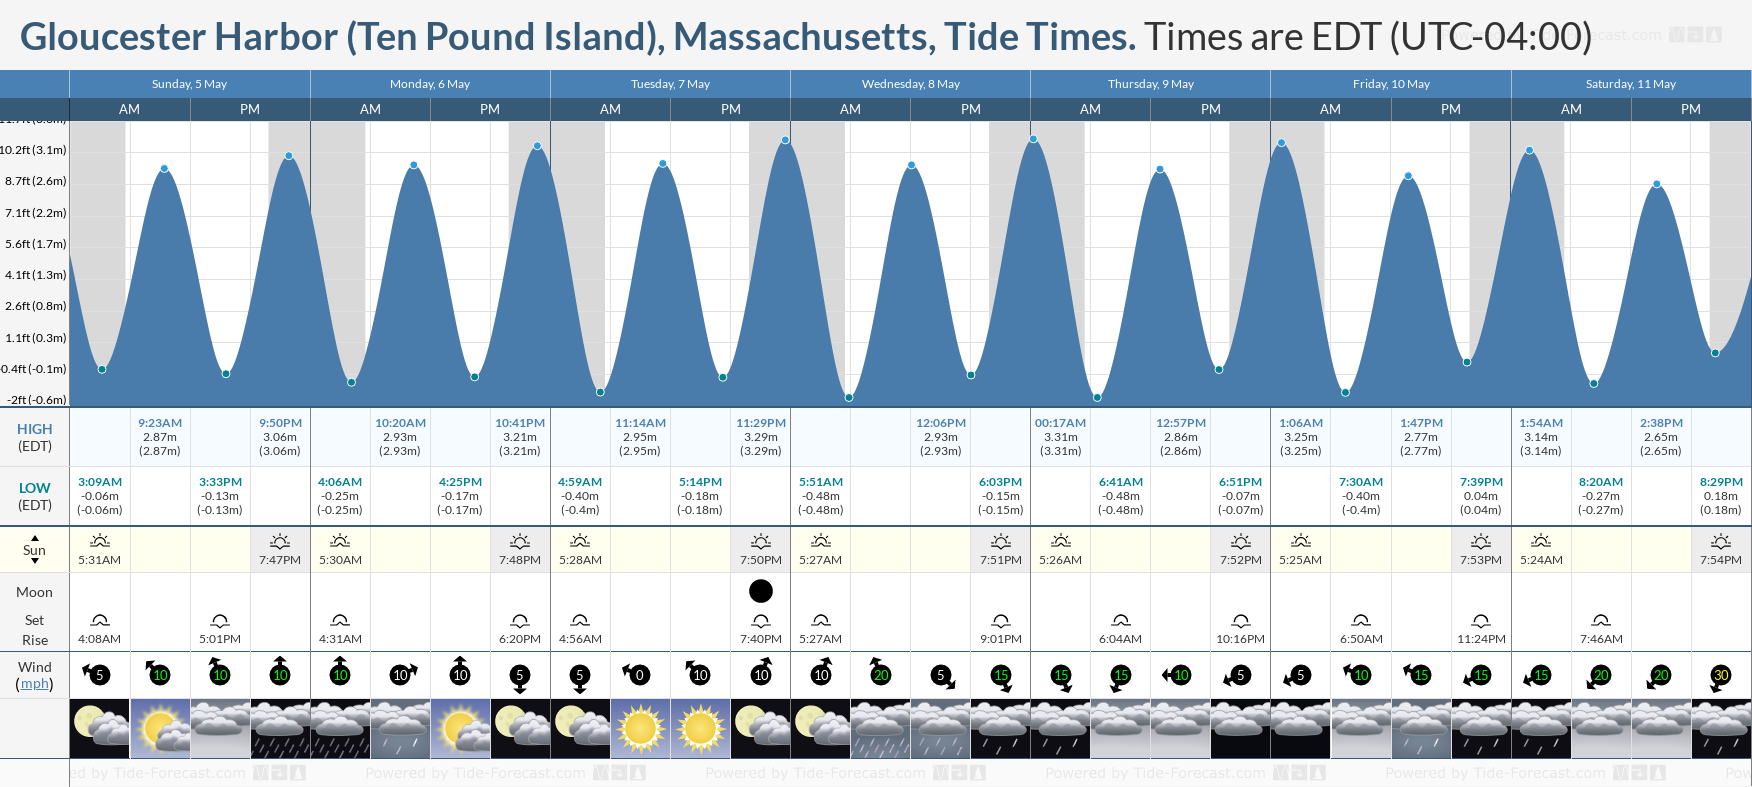 Gloucester Harbor (Ten Pound Island), Massachusetts Tide Chart including high and low tide tide times for the next 7 days